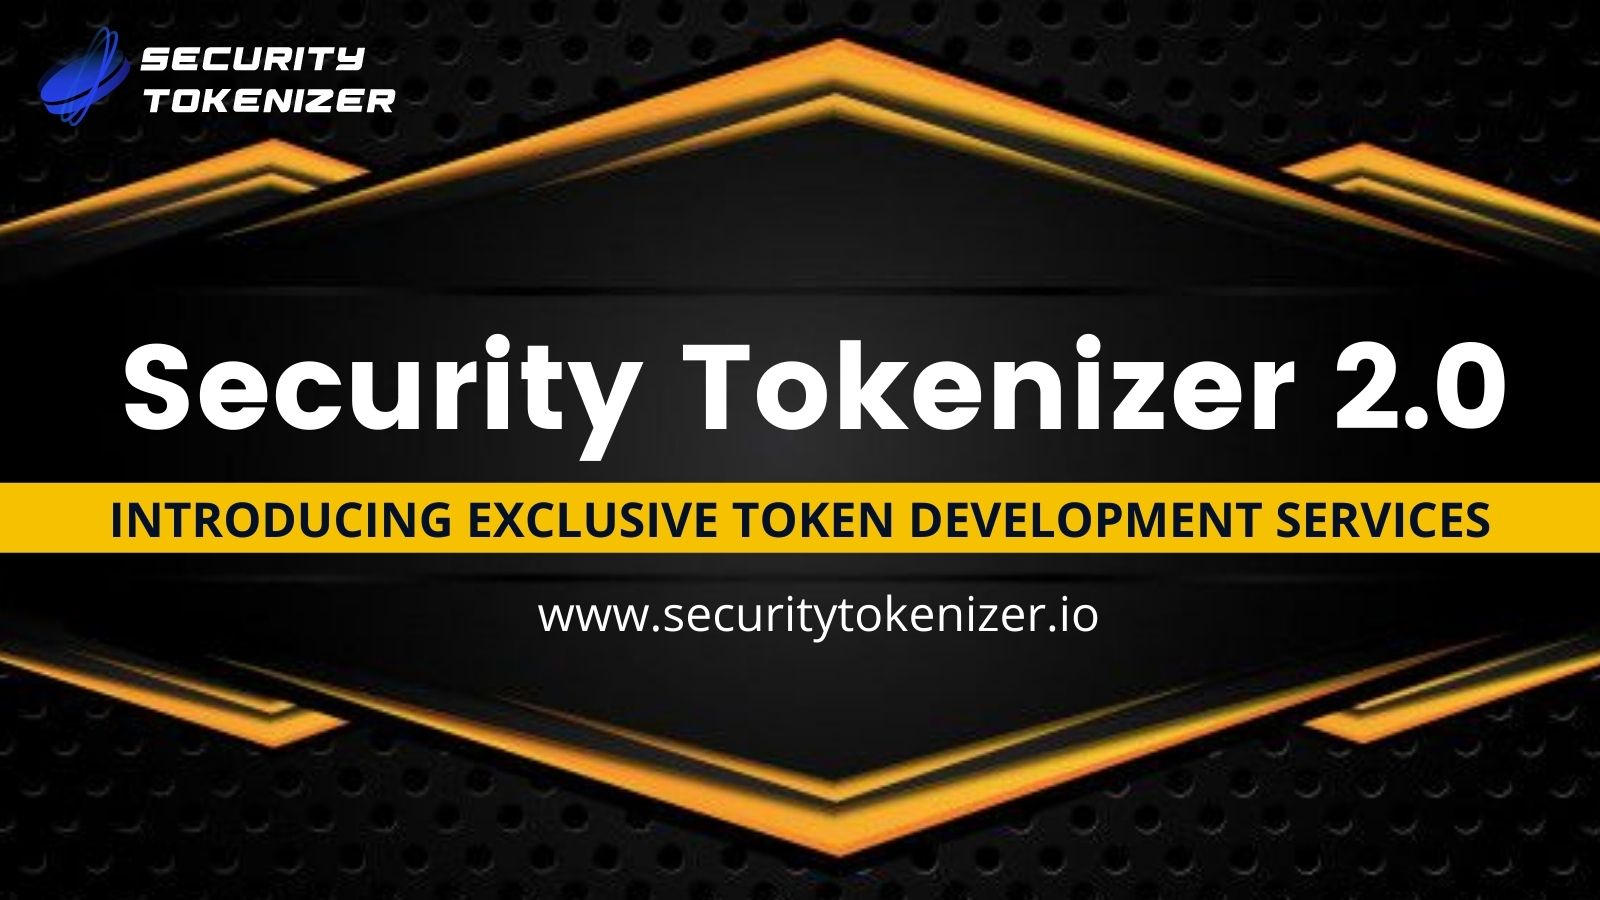 Security Tokenizer Entering Into The Crypto Market With New Token Development Solutions